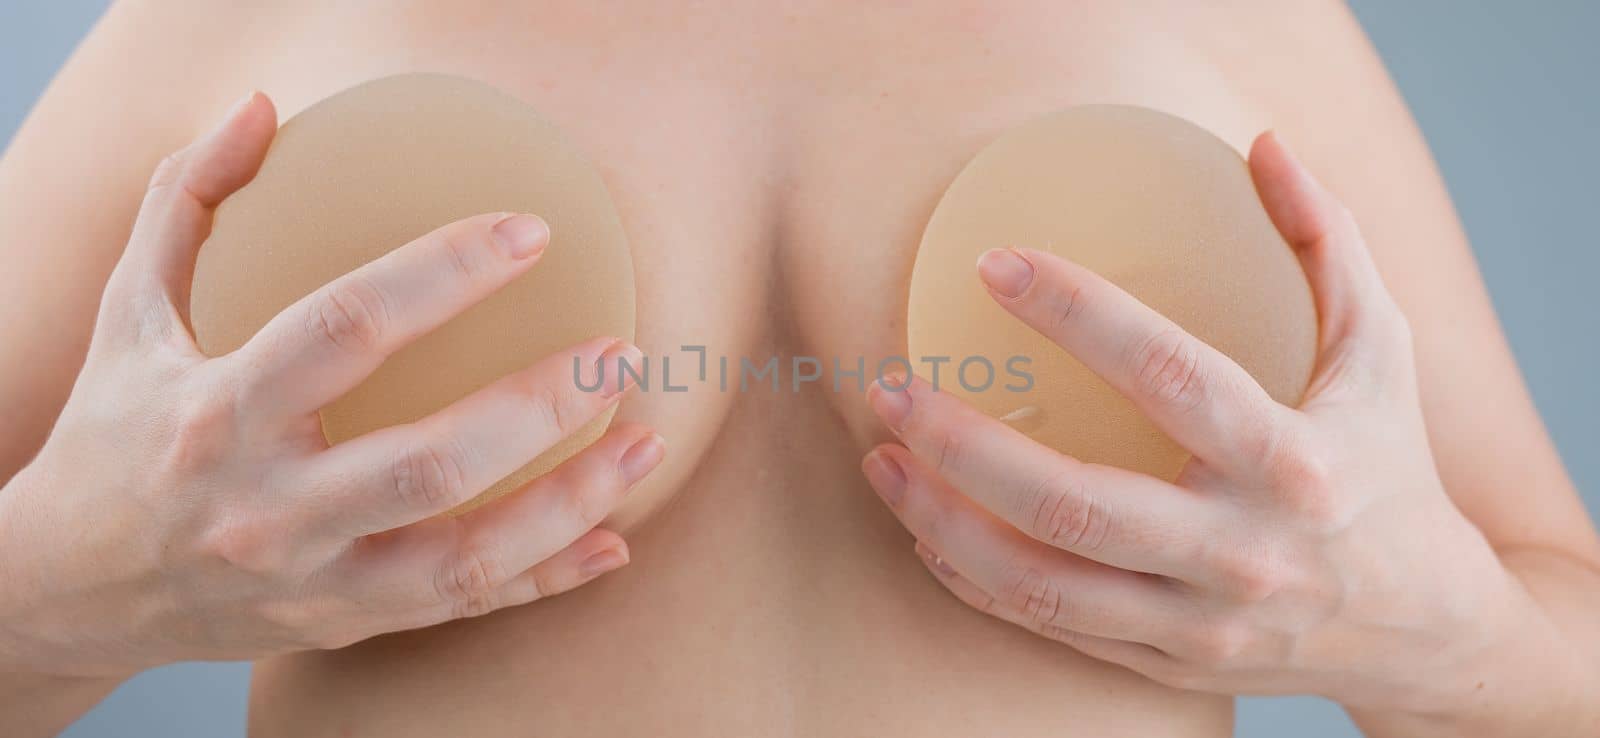 Caucasian naked woman trying on silicone breast implants. by mrwed54